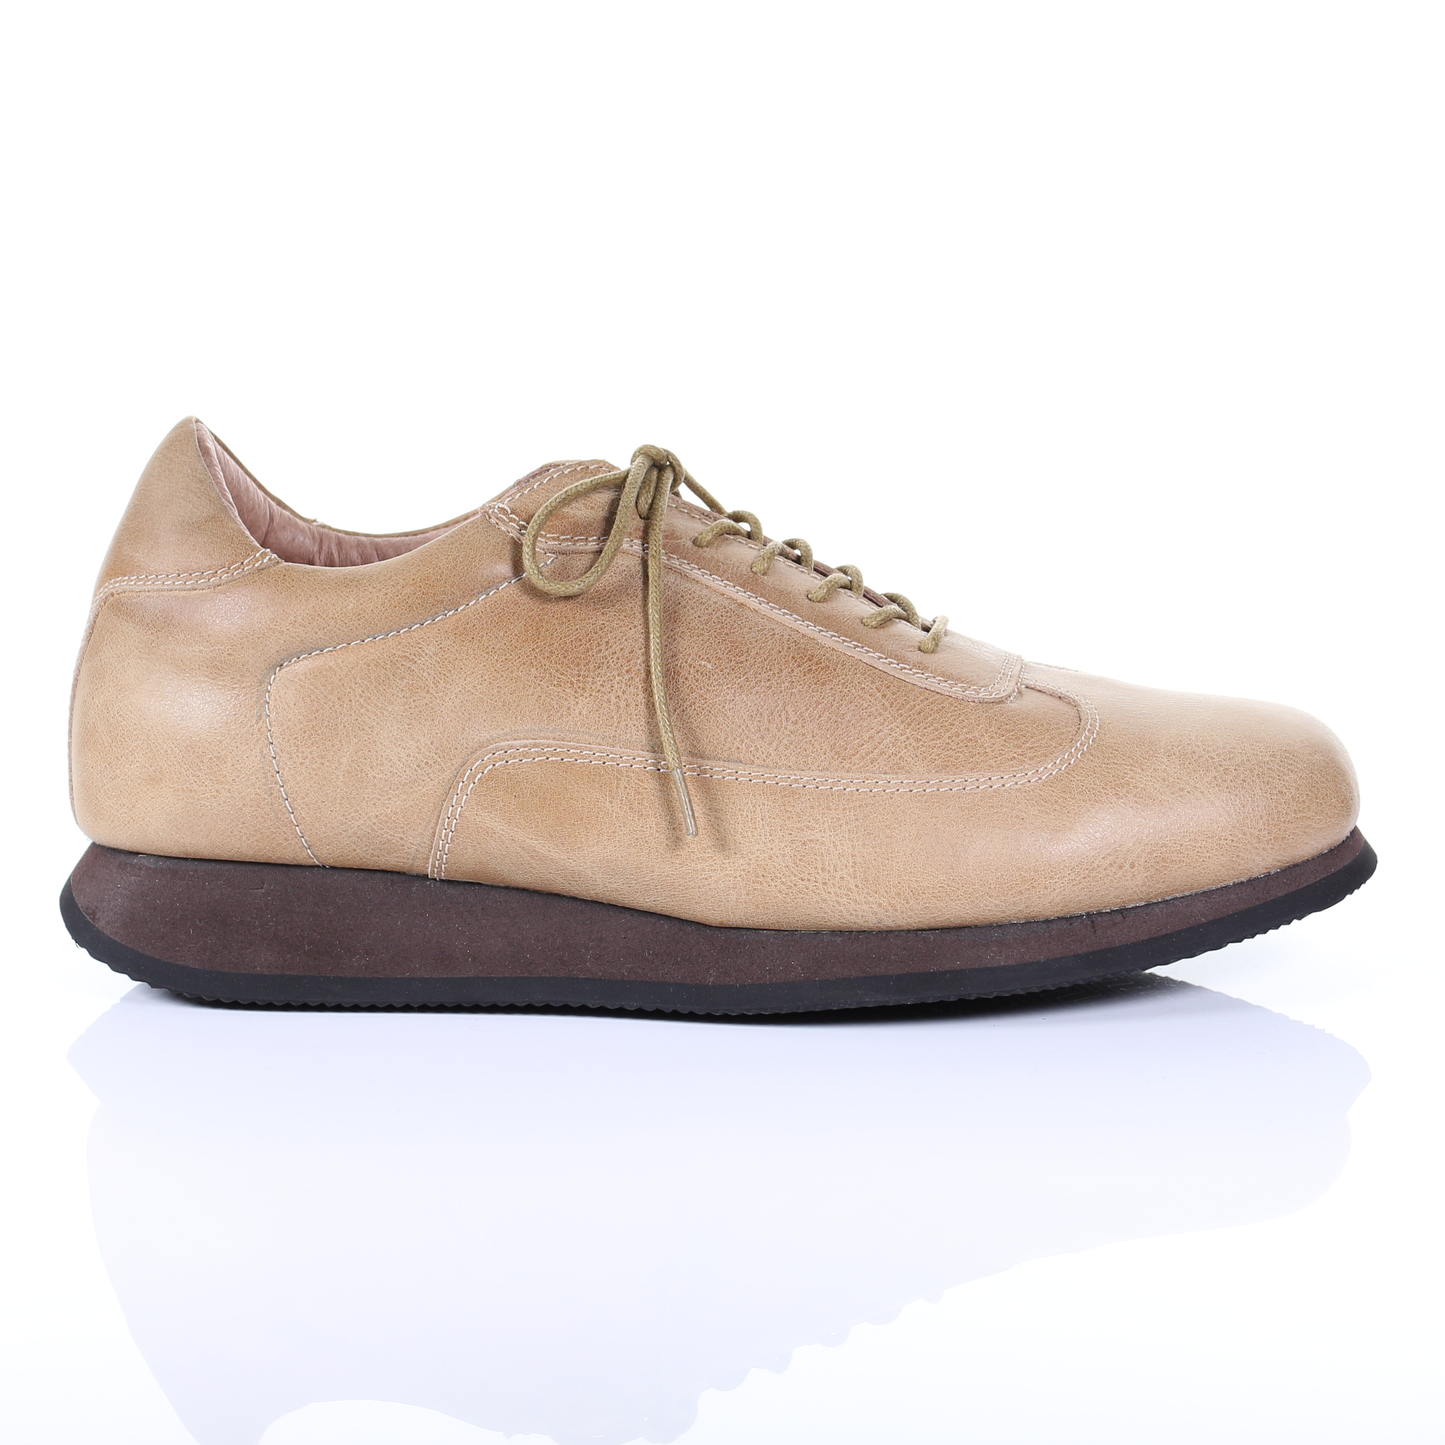 Men's Style Lace Up Leather Casual Shoes (Beige)